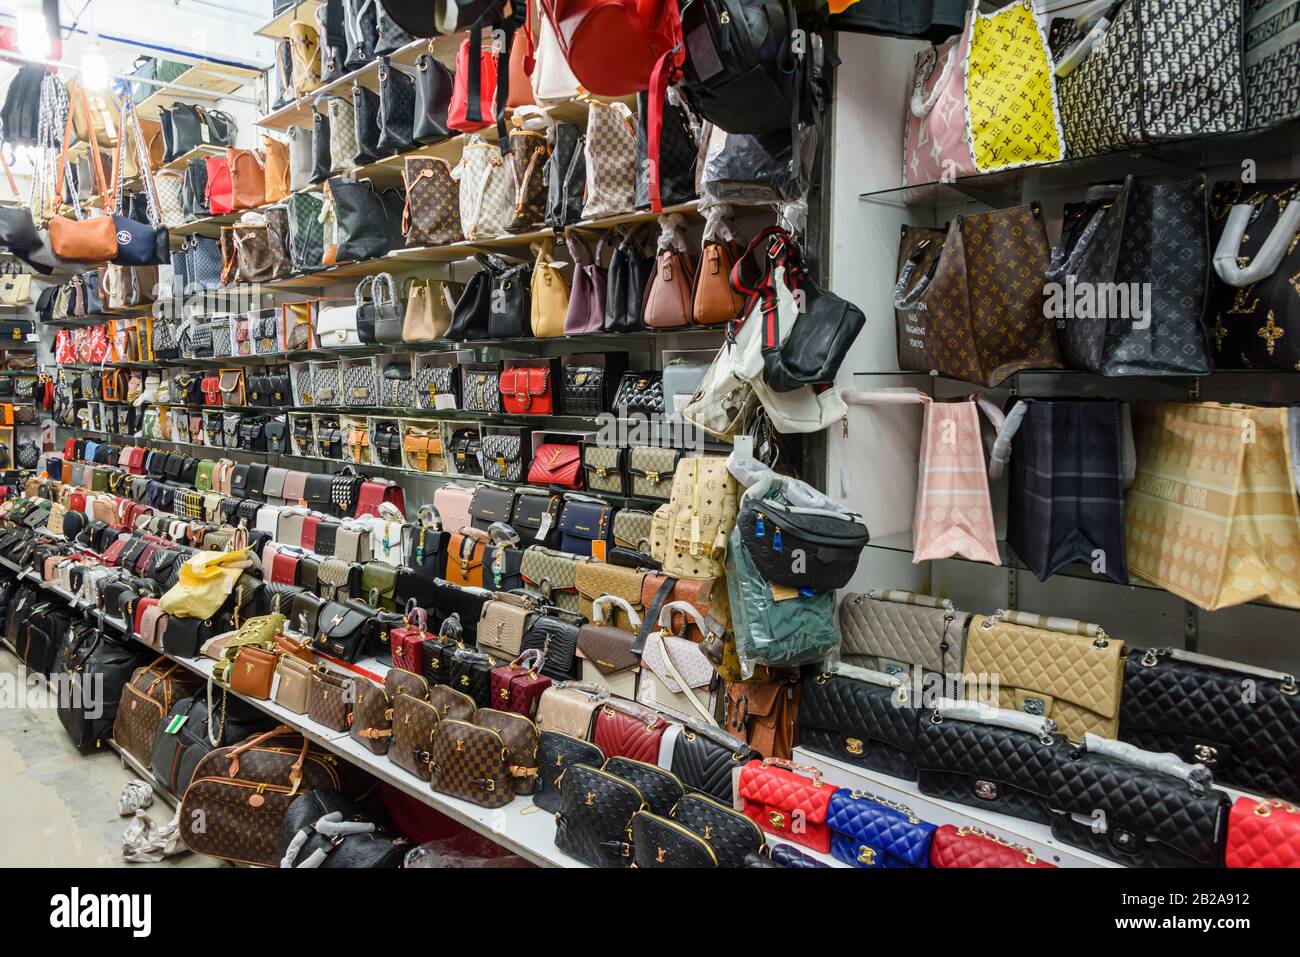 One of the 'back rooms', selling fake counterfeit designer goods including handbags, sunglasses and watches, Patong, Phuket, Thailand Stock Photo